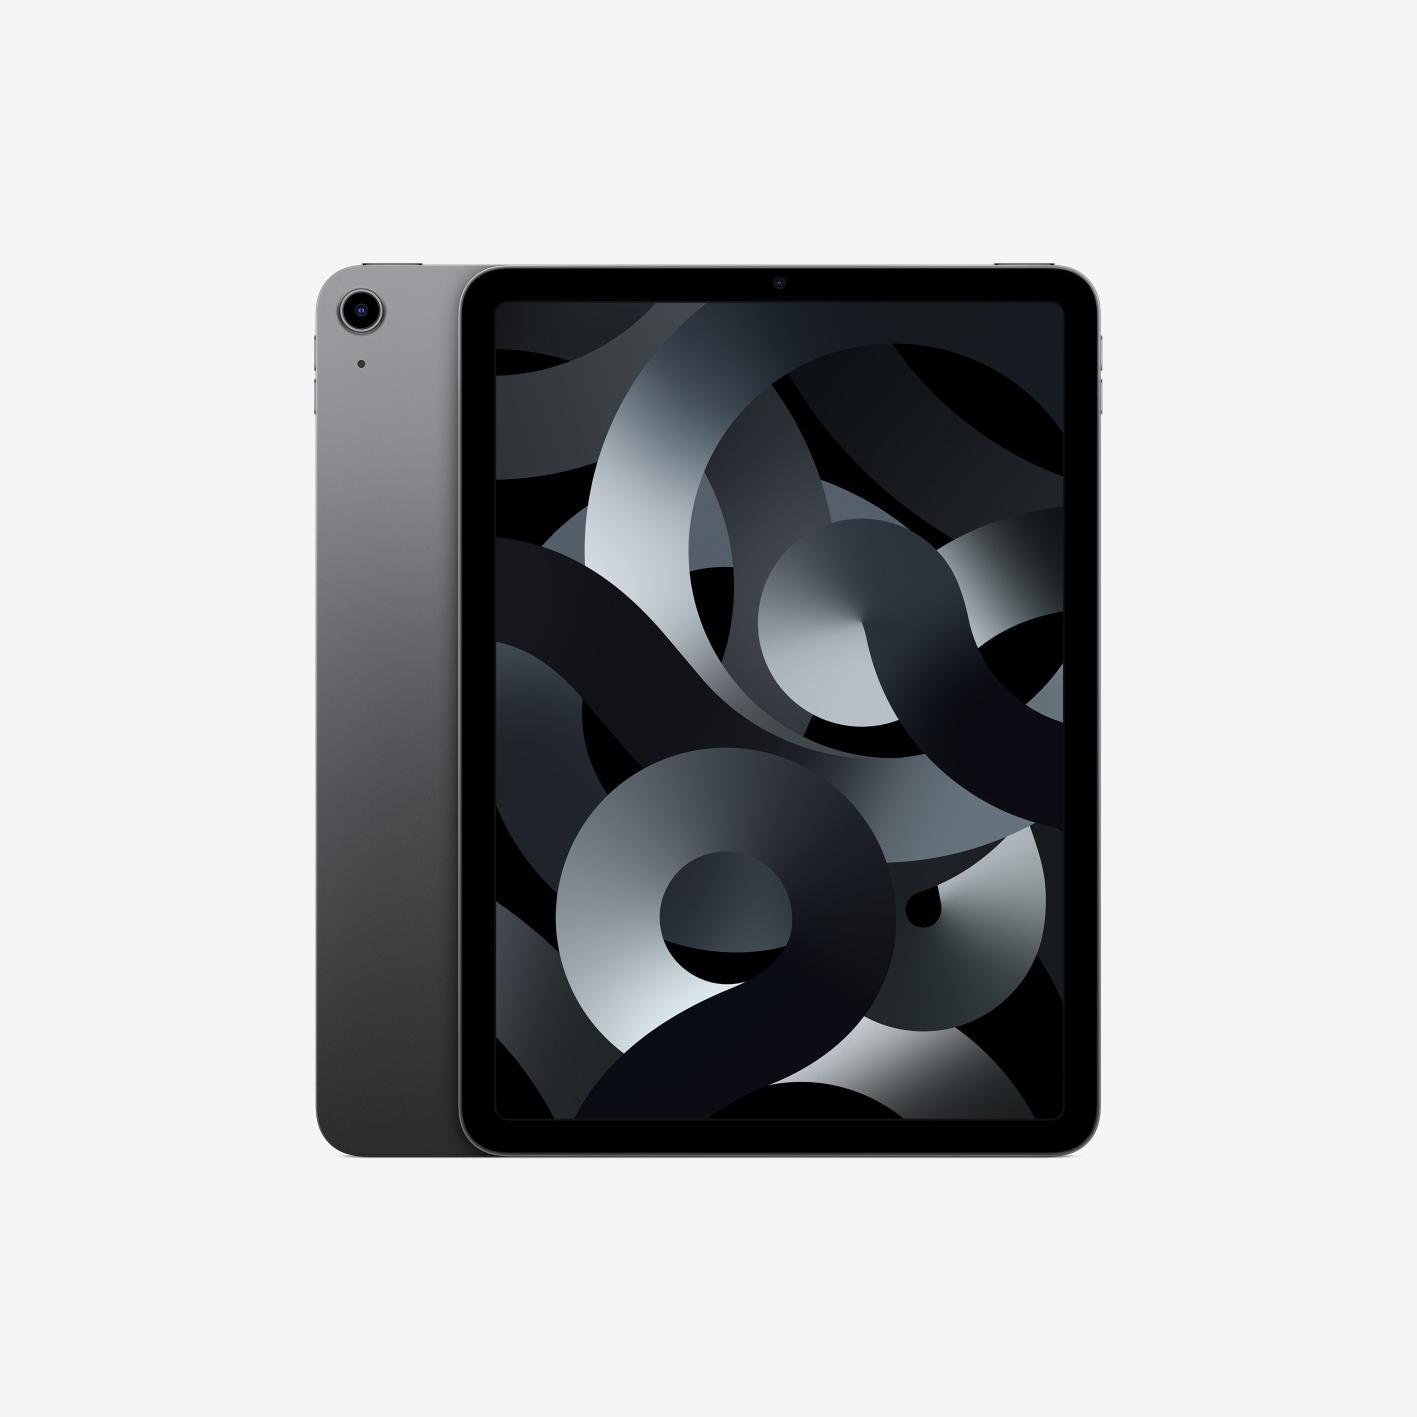 ipad-air-finish-select-gallery-202211-space-gray